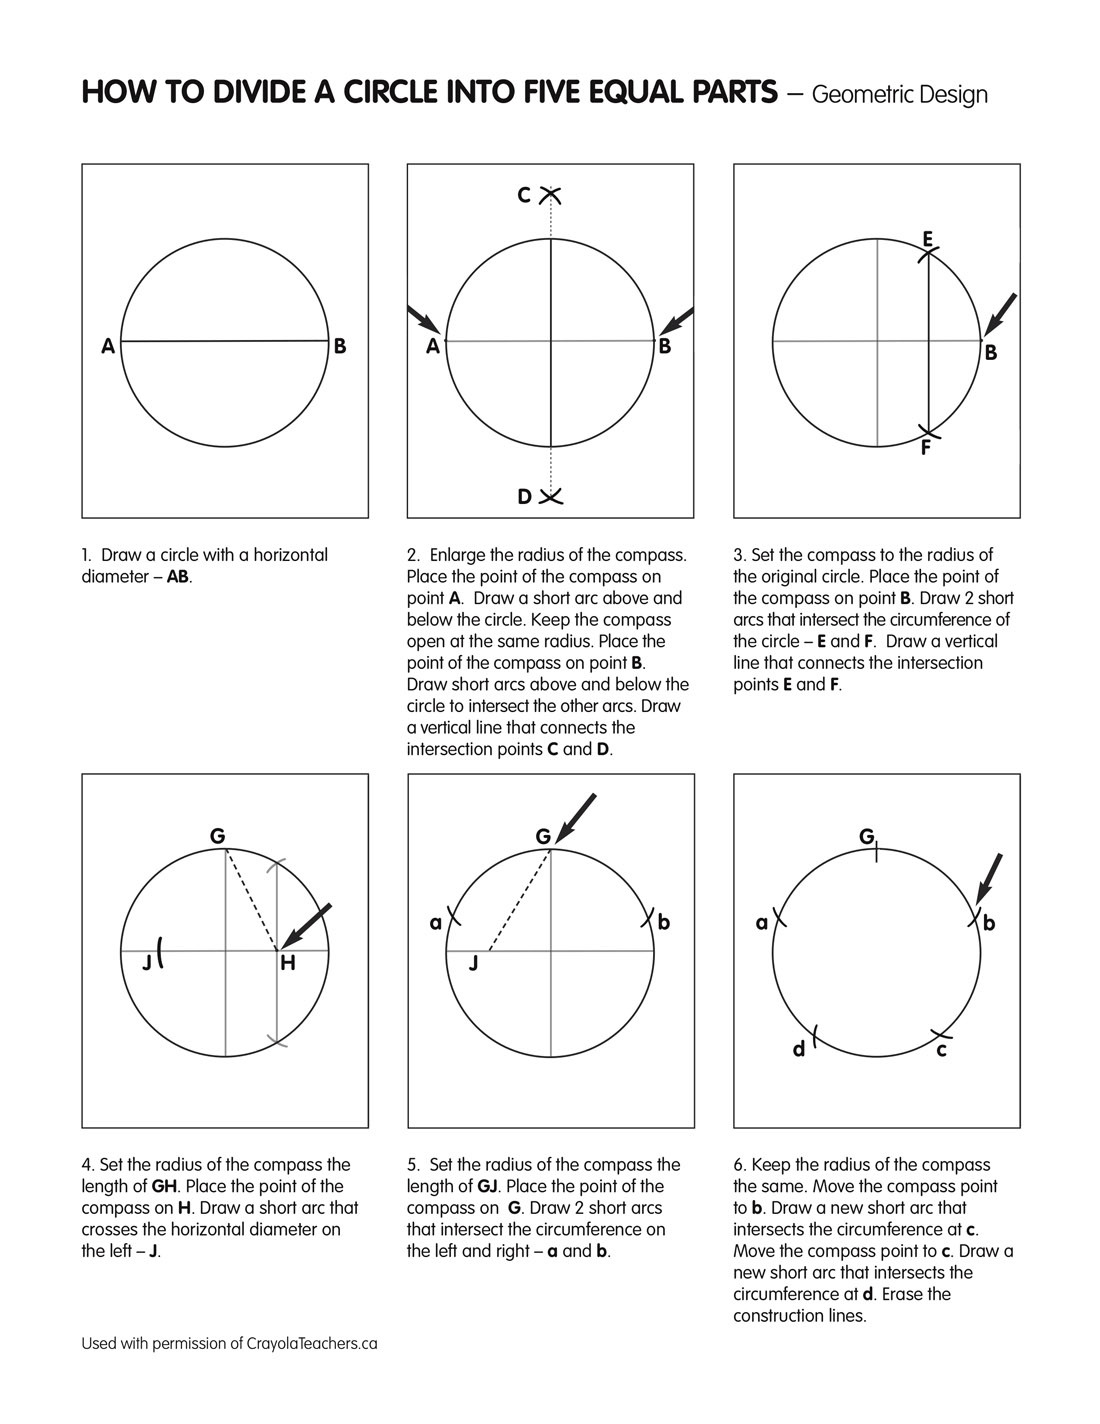 How to Divide a Circle into 5 Equal Parts